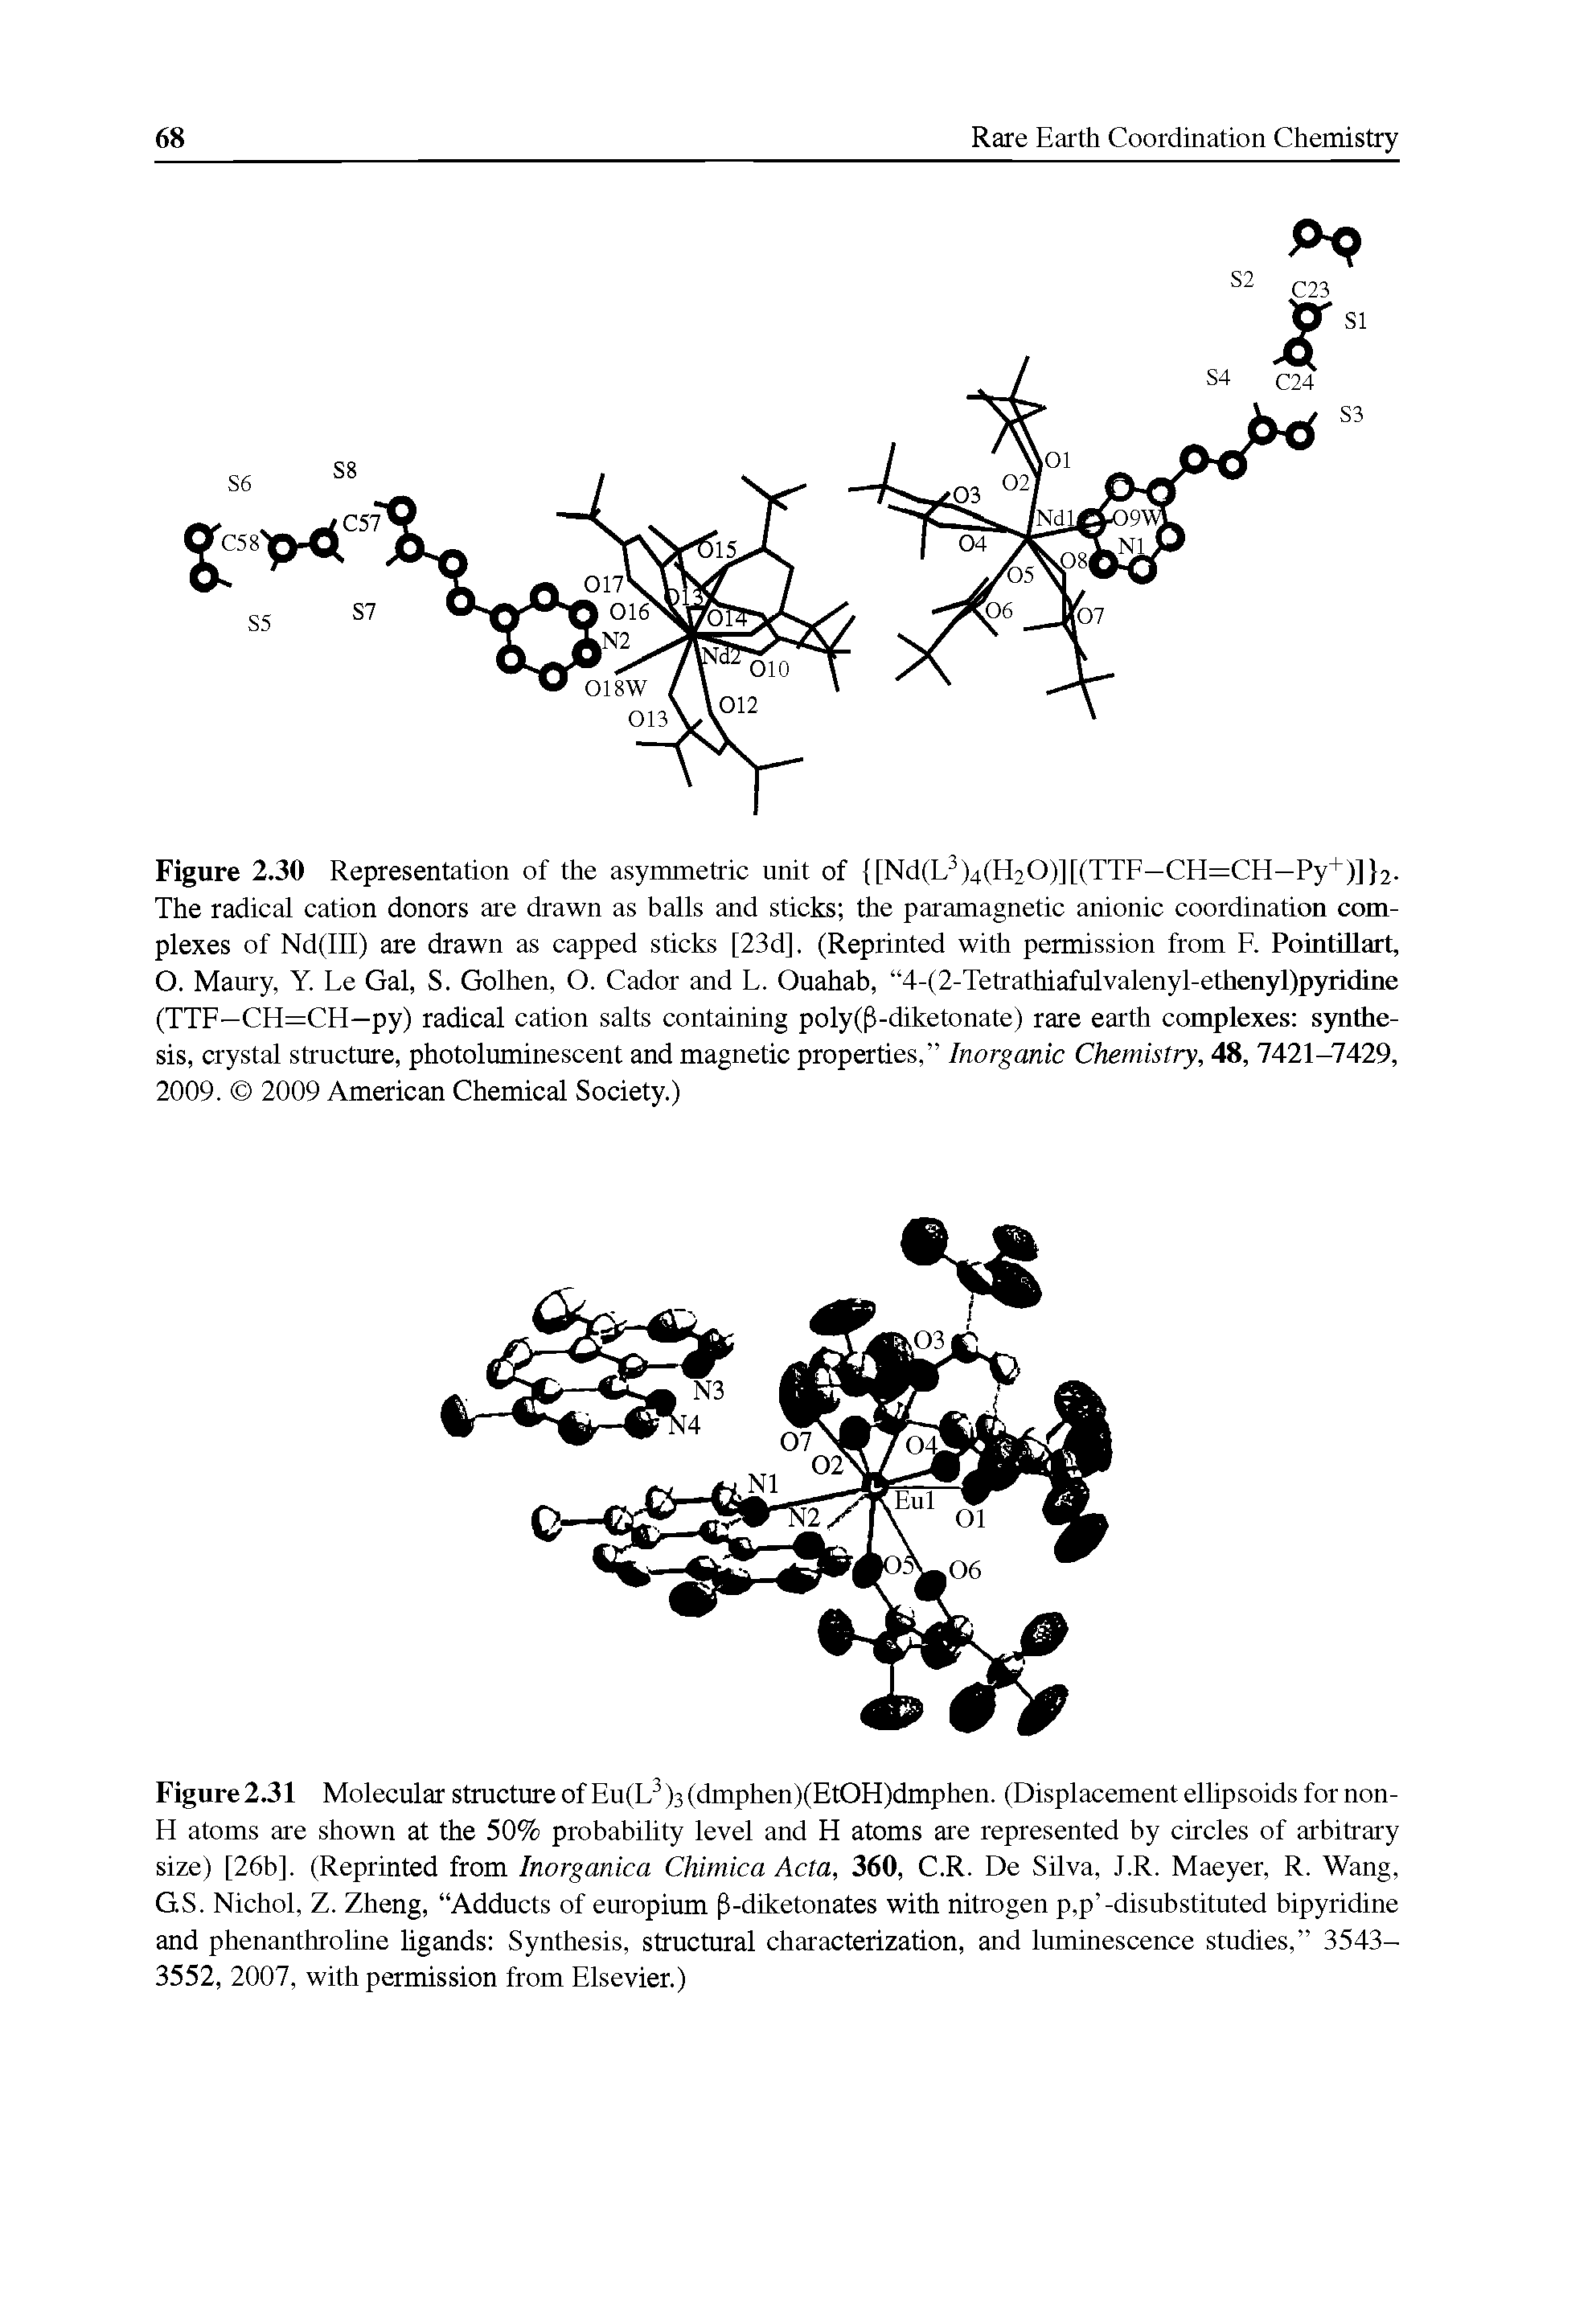 Figure 2.31 Molecular structure of Eu(F )3 (dmphen)(EtOH)dmphen. (Displacement ellipsoids for non-FI atoms are shown at the 50% probability level and H atoms are represented by circles of arbitrary size) [26b]. (Reprinted from Inorganica Chimica Acta, 360, C.R. De Silva, J.R. Maeyer, R. Wang, GS. Nichol, Z. Zheng, Adducts of europium -diketonates with nitrogen p,p -disubstituted bipyridine and phenanthroline ligands Synthesis, structural characterization, and luminescence studies, 3543-3552, 2007, with permission from Elsevier.)...